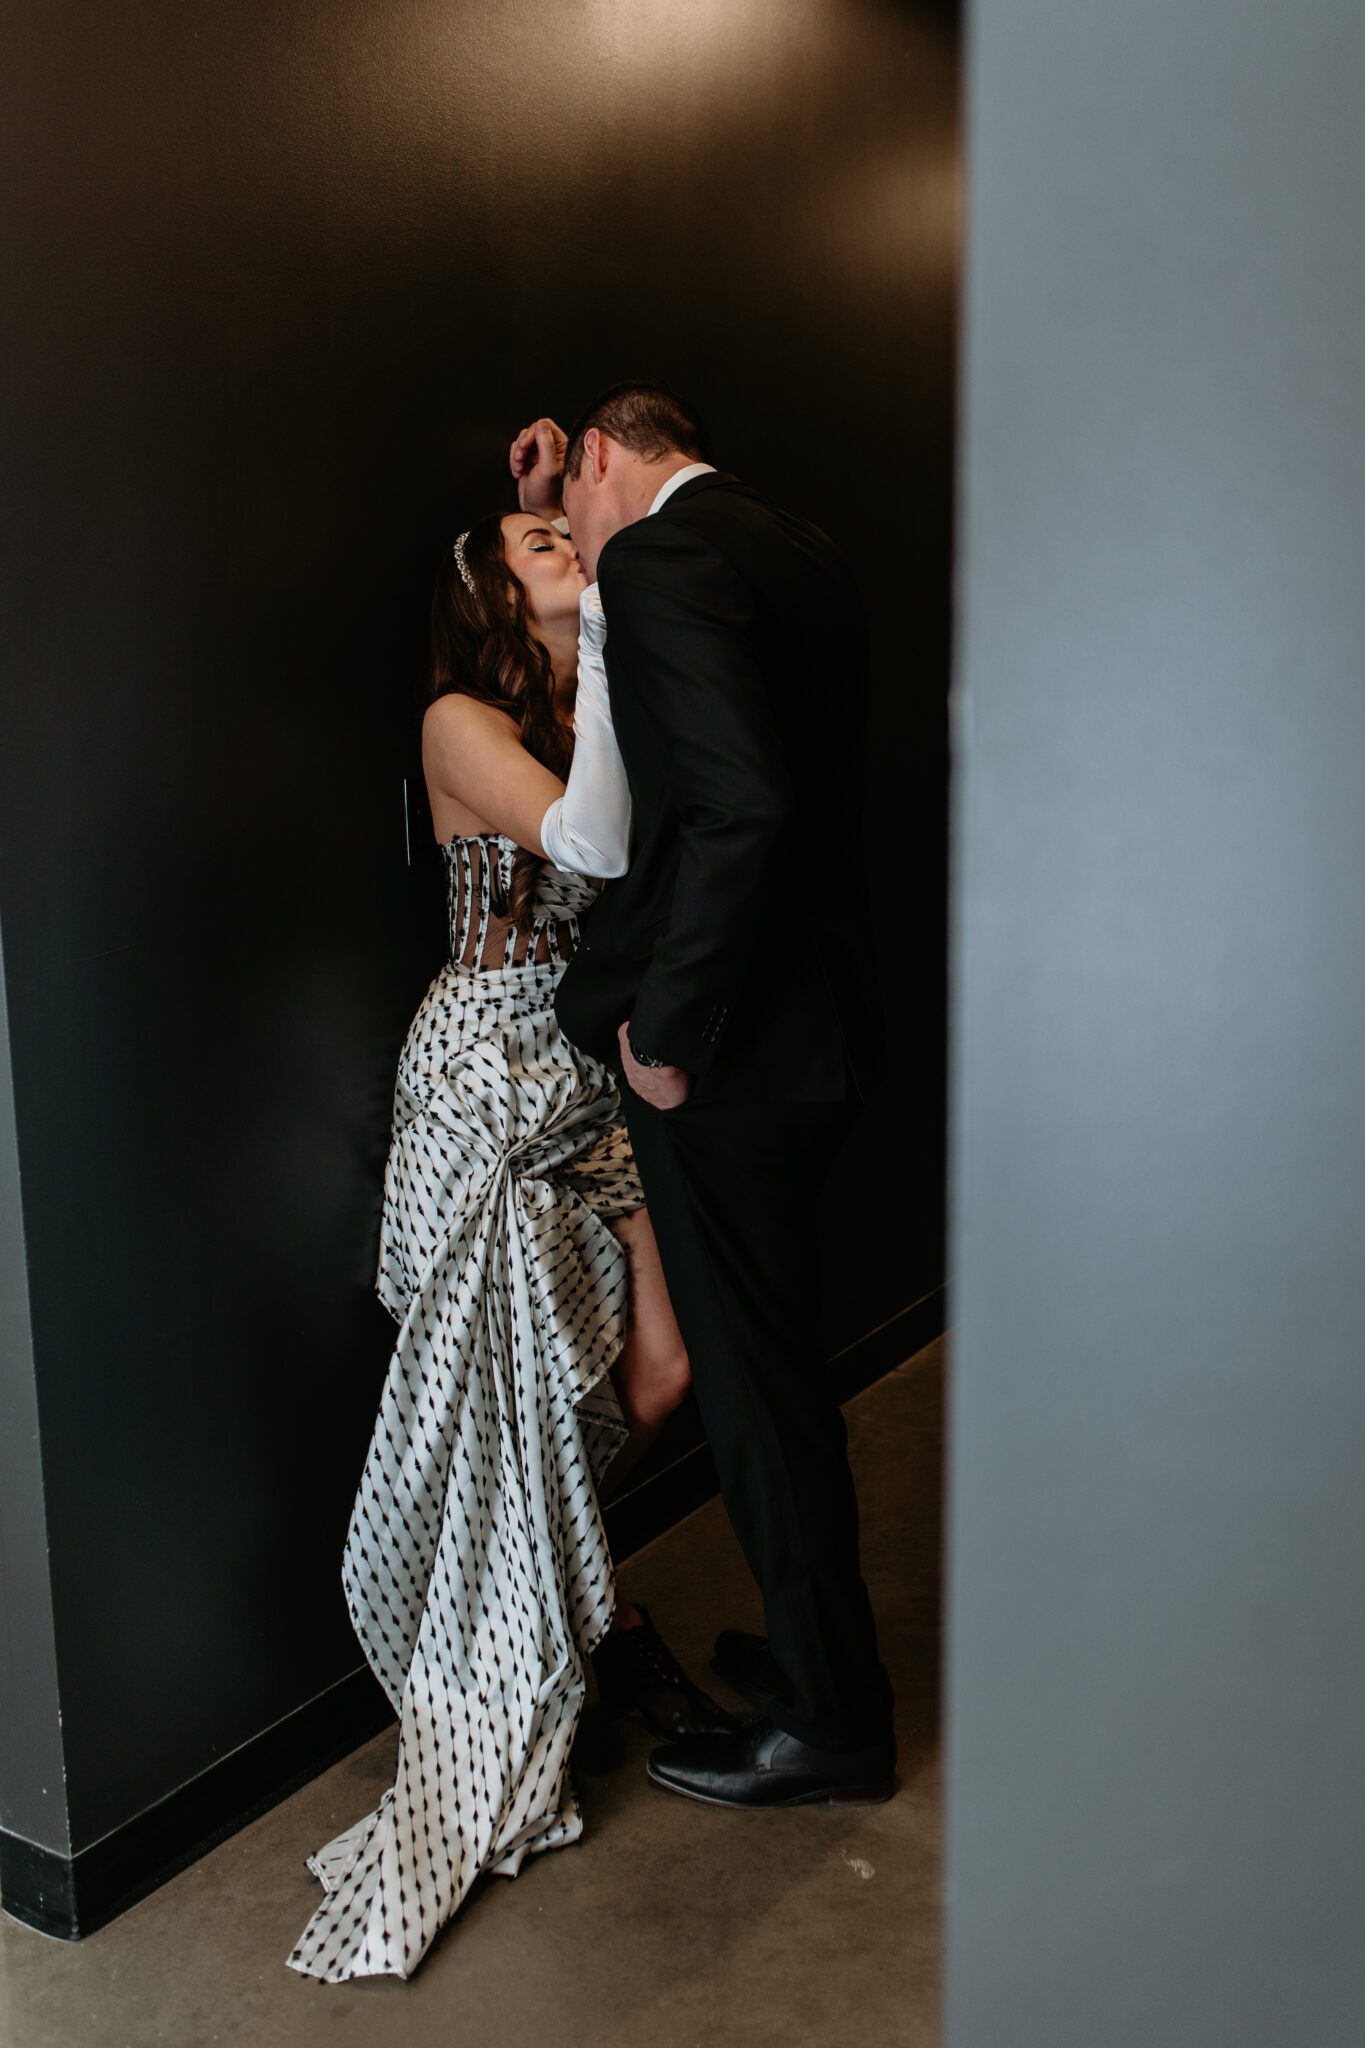 Bride and groom kissing in hallway at retro-inspired wedding at The Brownstone in Calgary, Alberta.